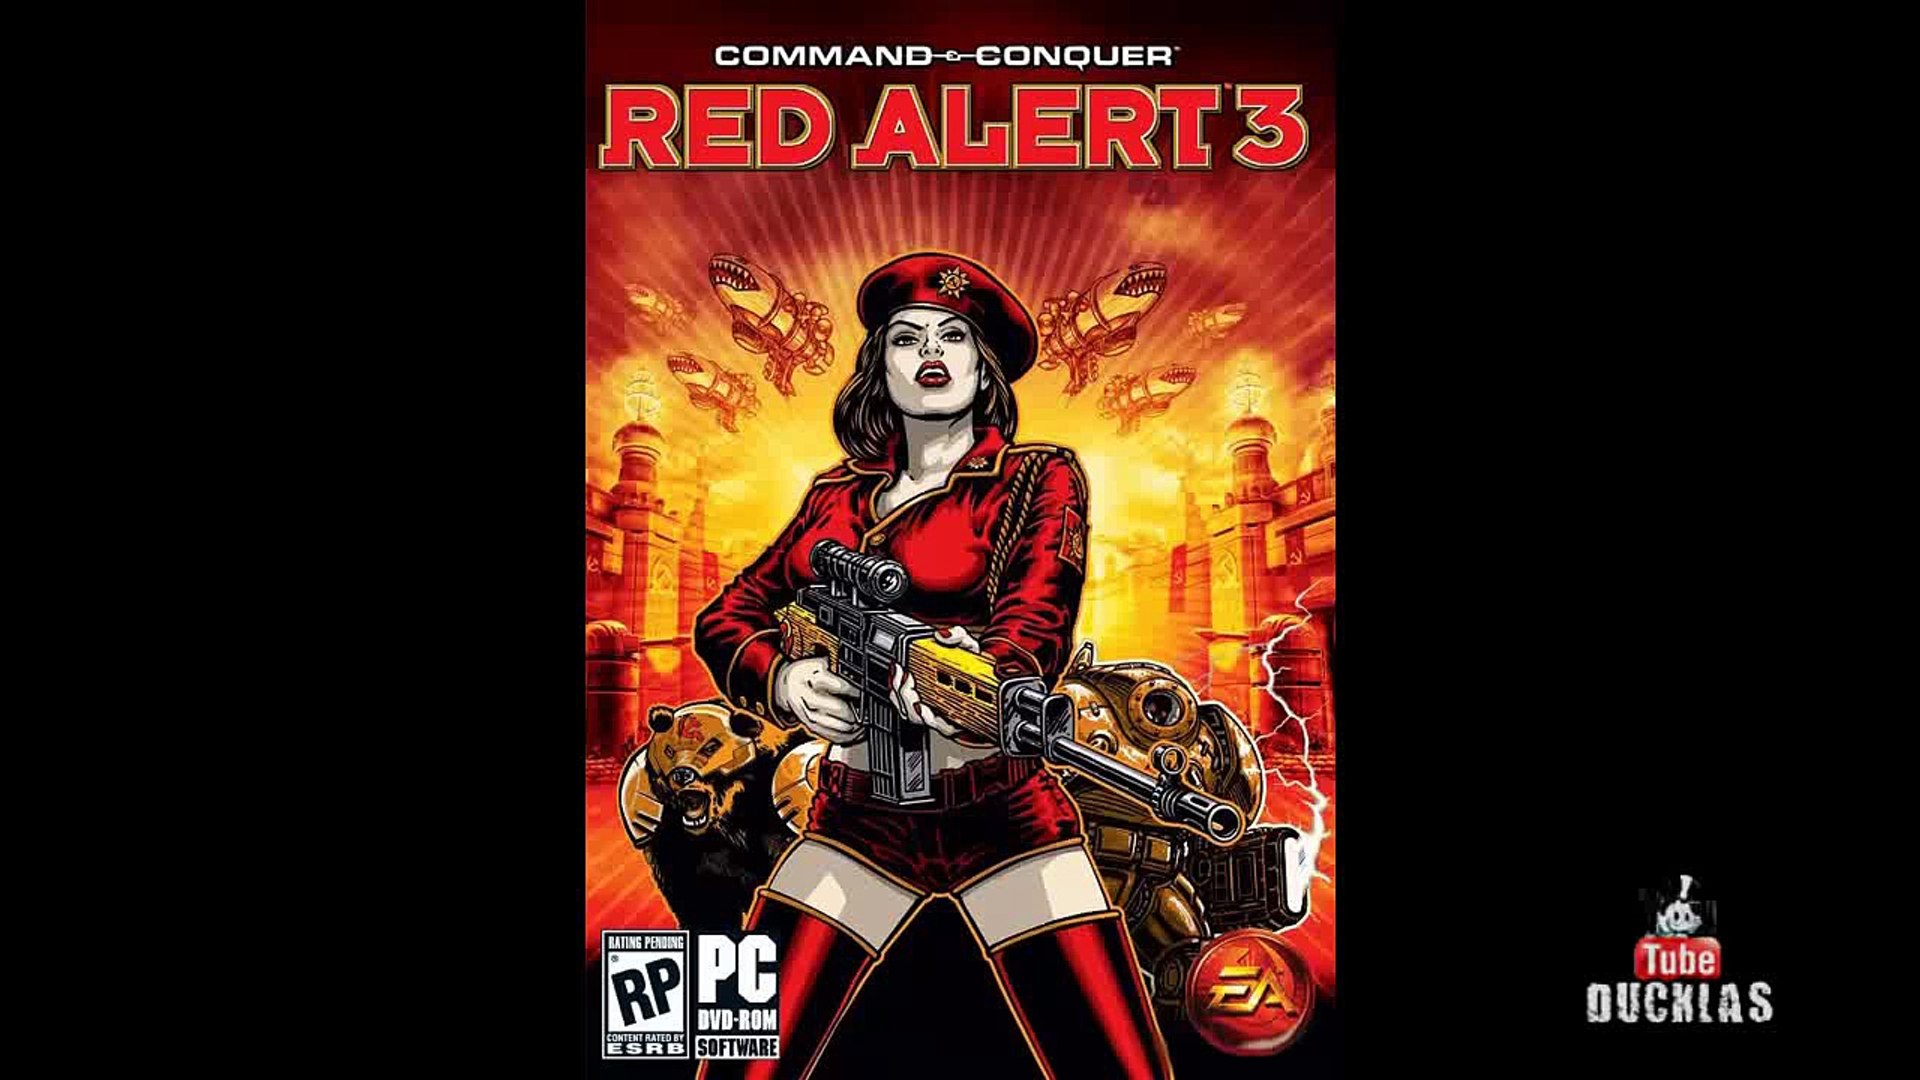 Red alert soundtrack. Command & Conquer: Red Alert 3. Command & Conquer: Red Alert 3 марш. Red Alert 3 OST. Red Alert 2 - Hell March 2.